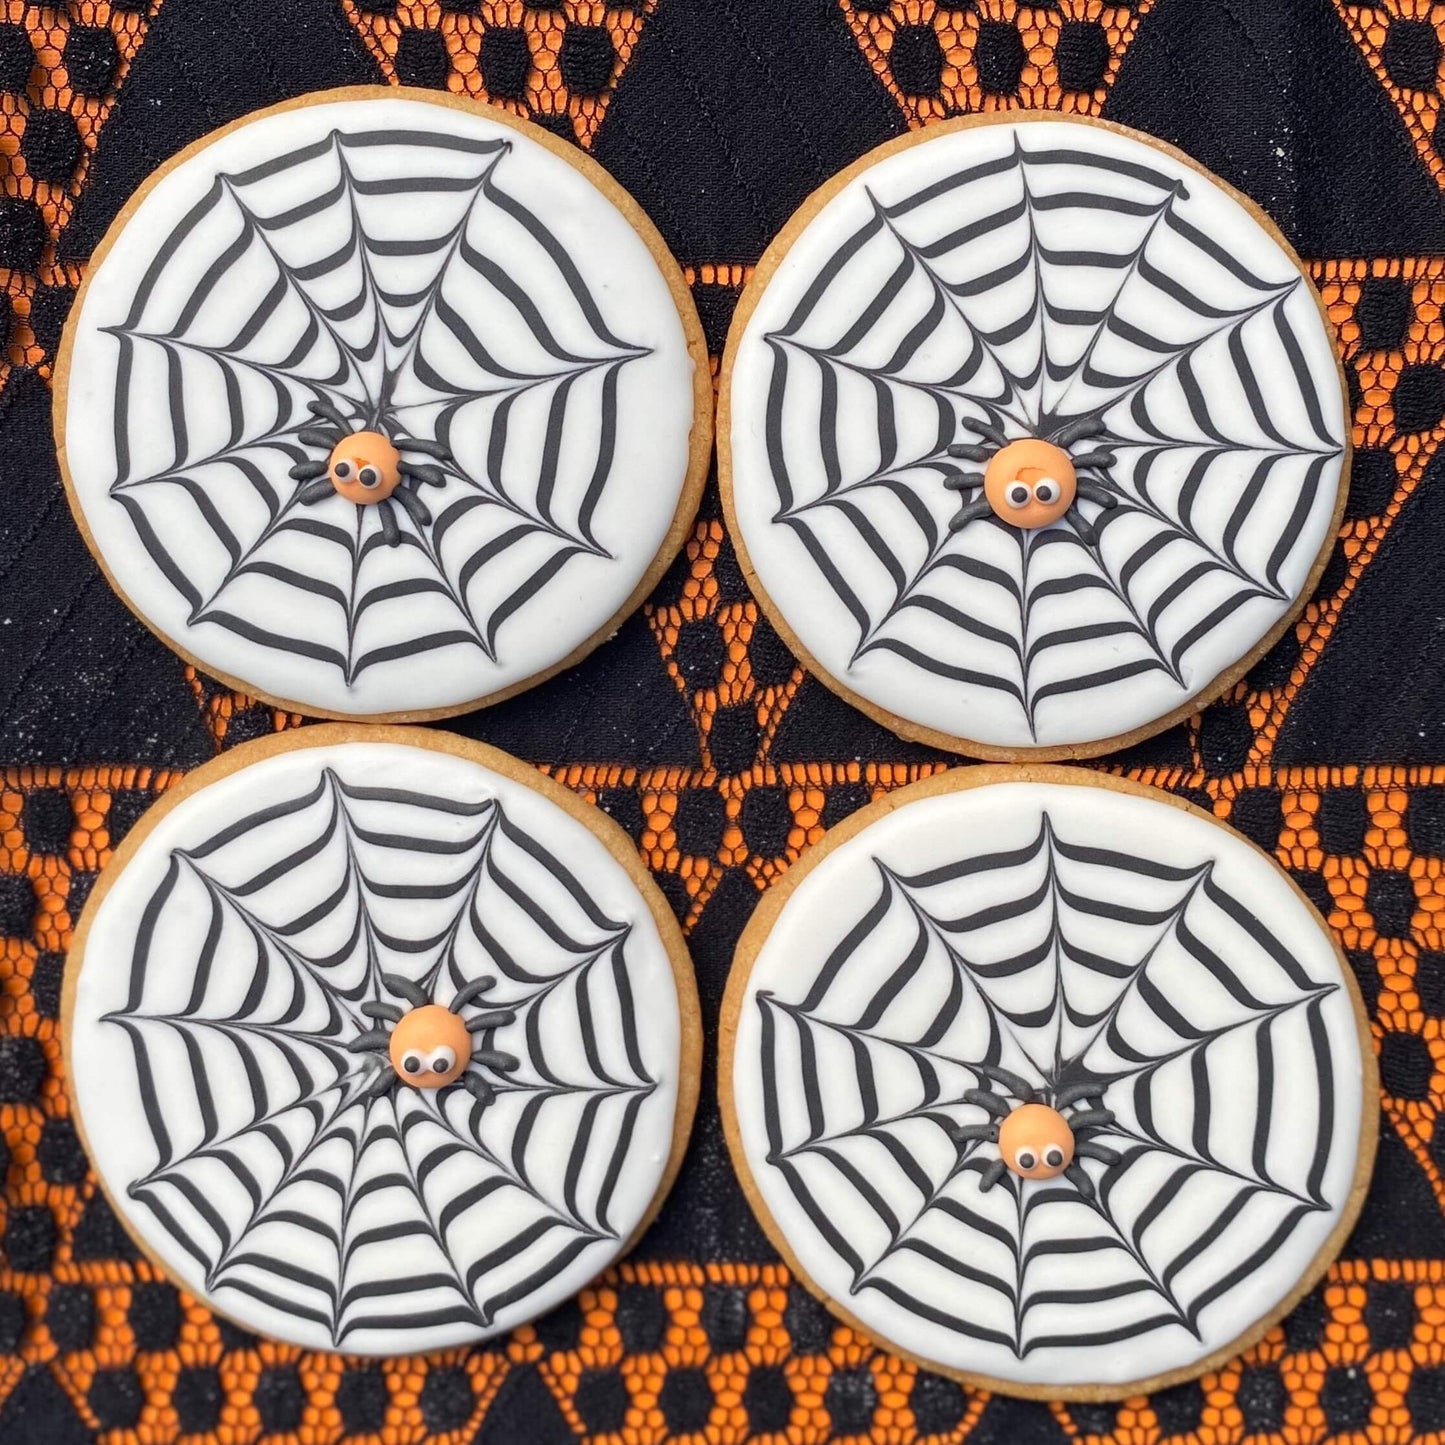 Spider Web decorated cookies